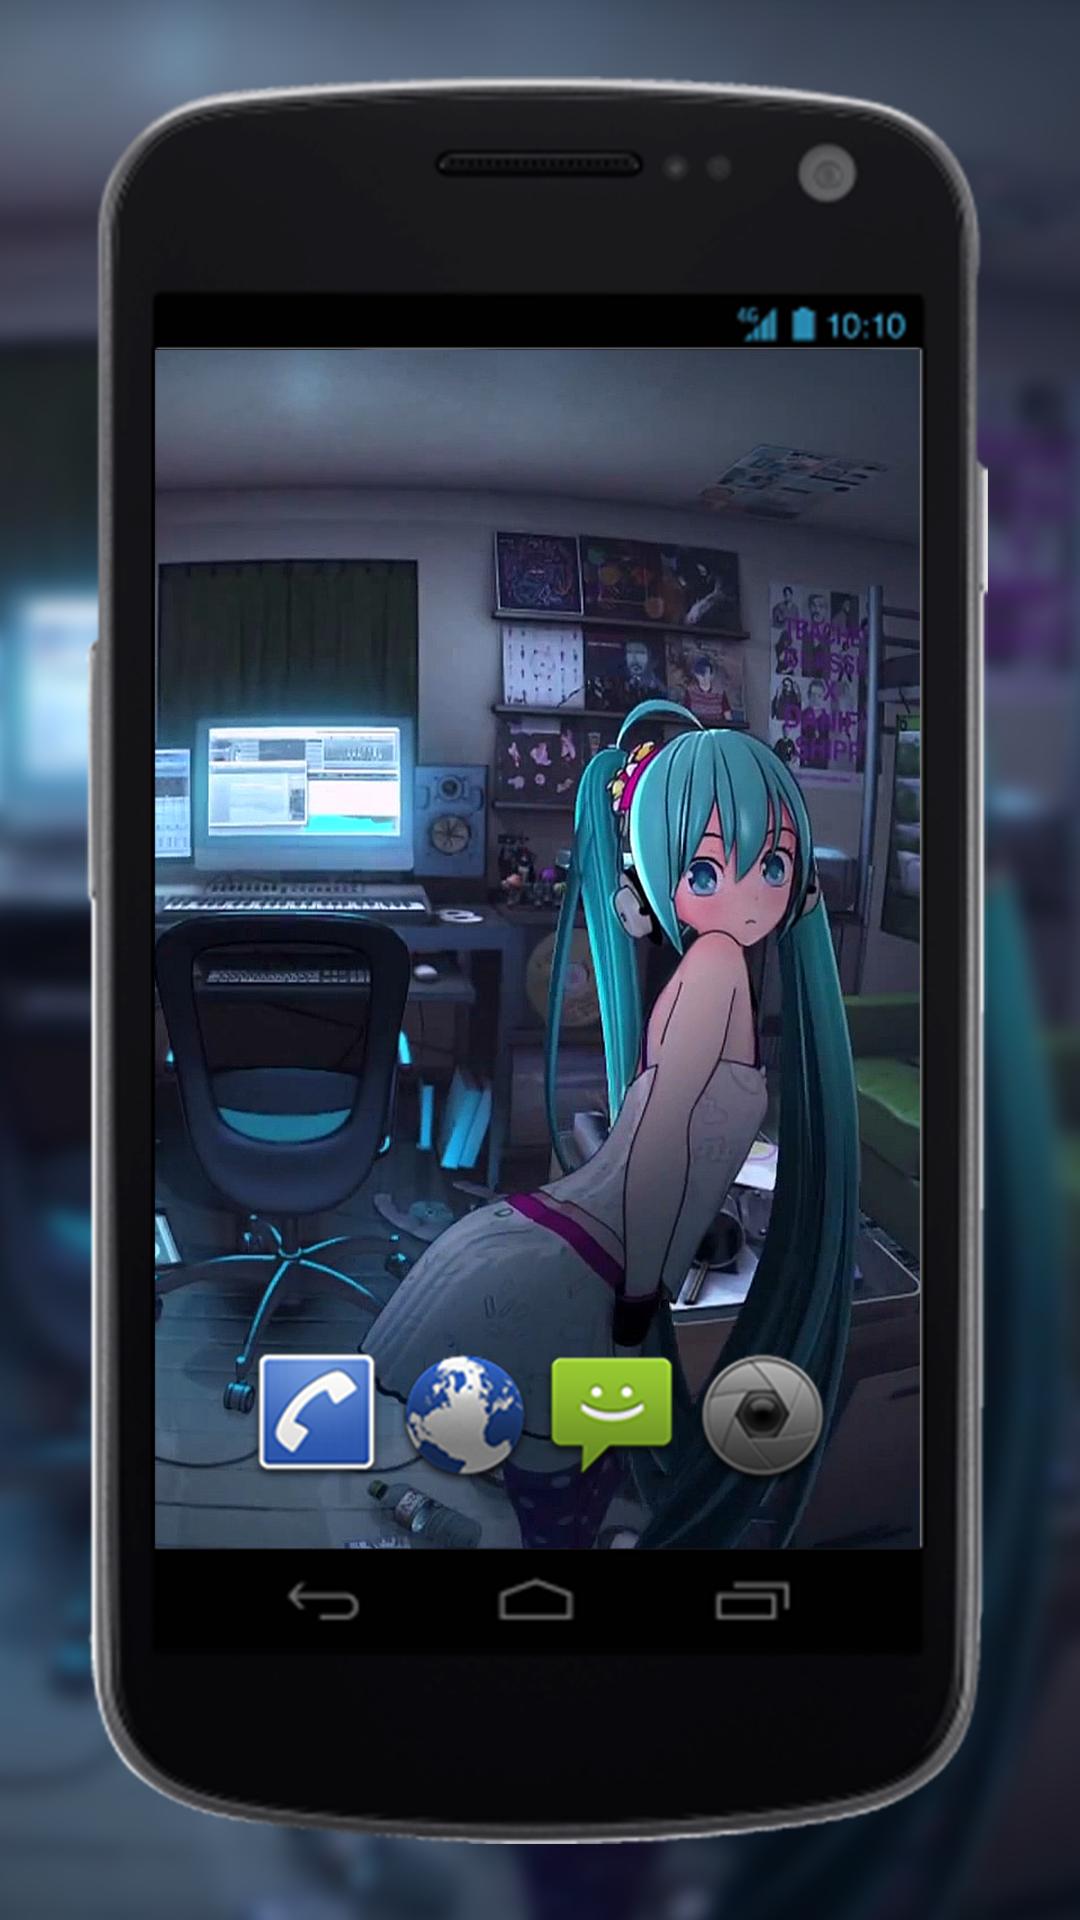 Hatsune Miku Live Wallpaper for Android - APK Download